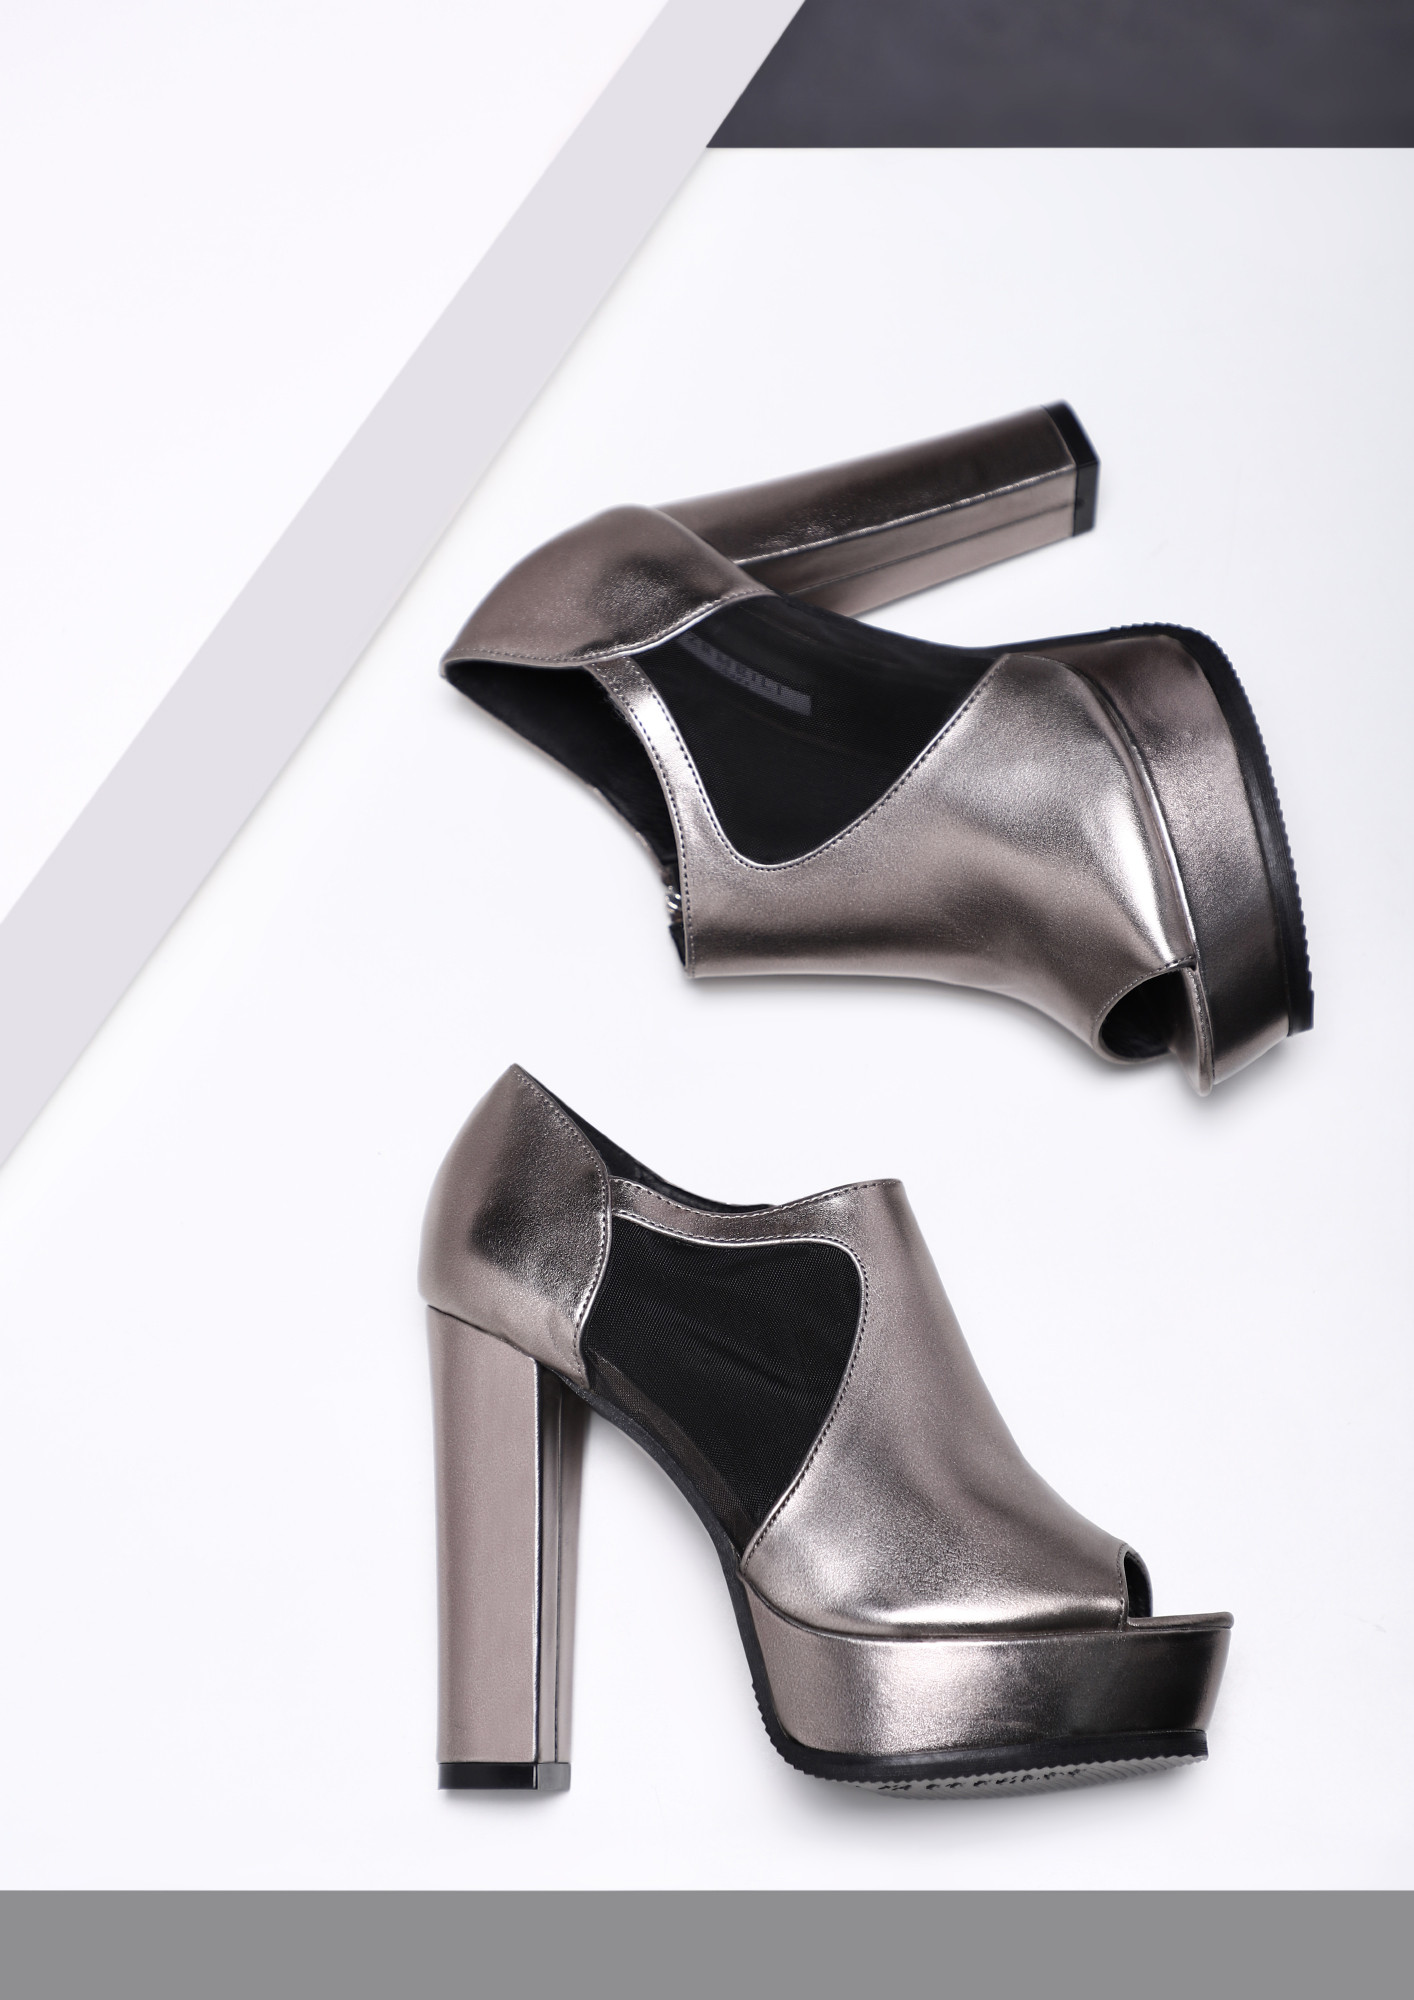 SMALL TALK GREY SILVER HEELED SHOES